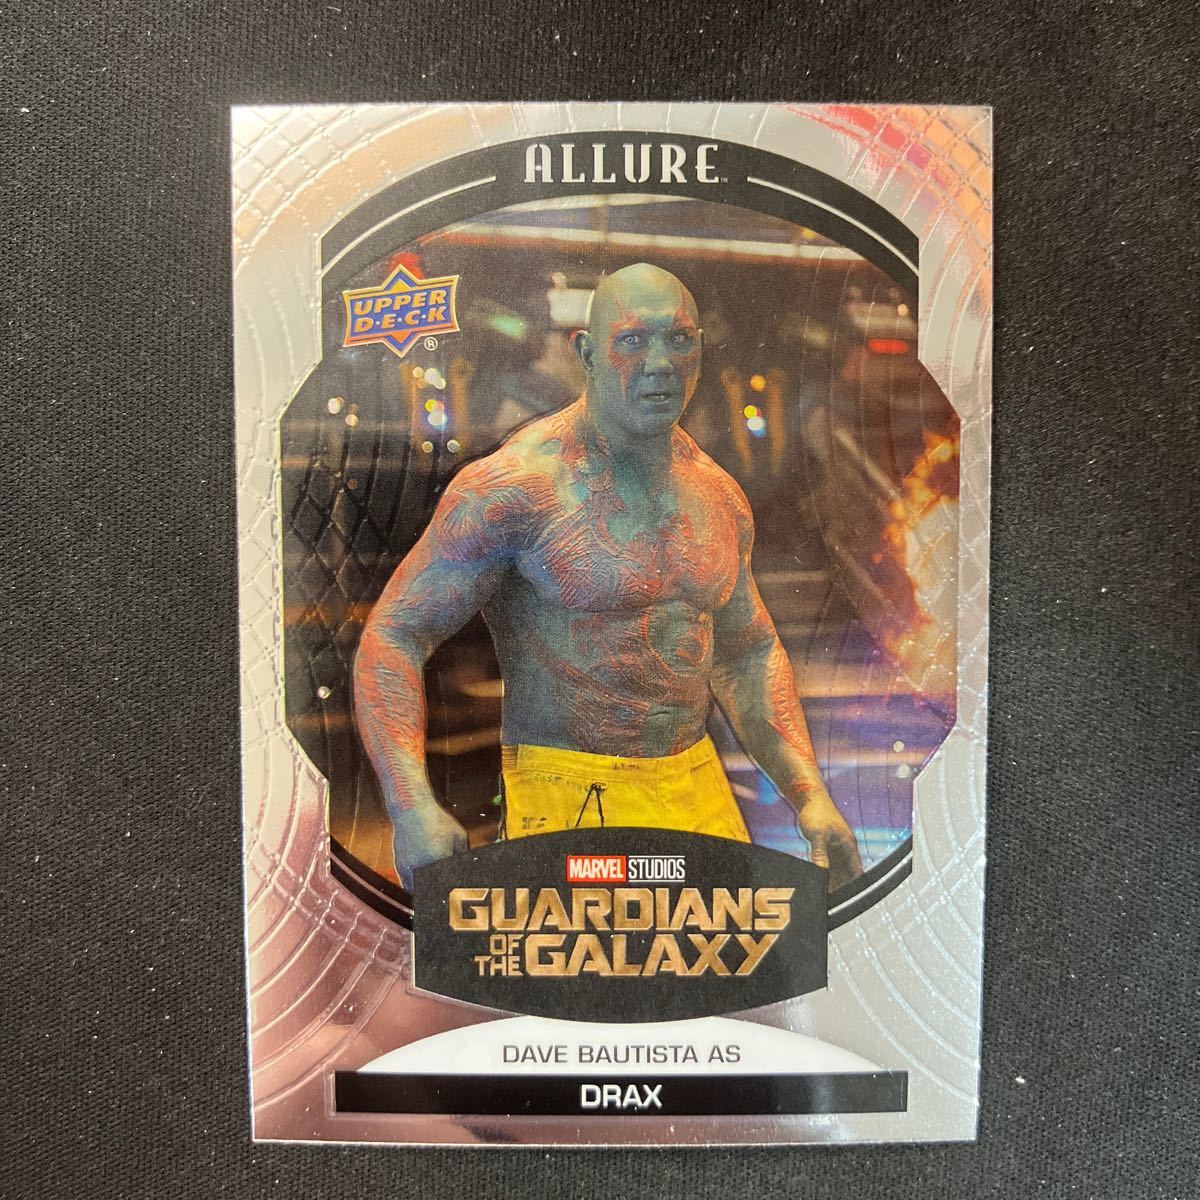 2022 Upper Deck Marvel Allure Guardians Of The Galaxy Dave Bautista Draxの画像1